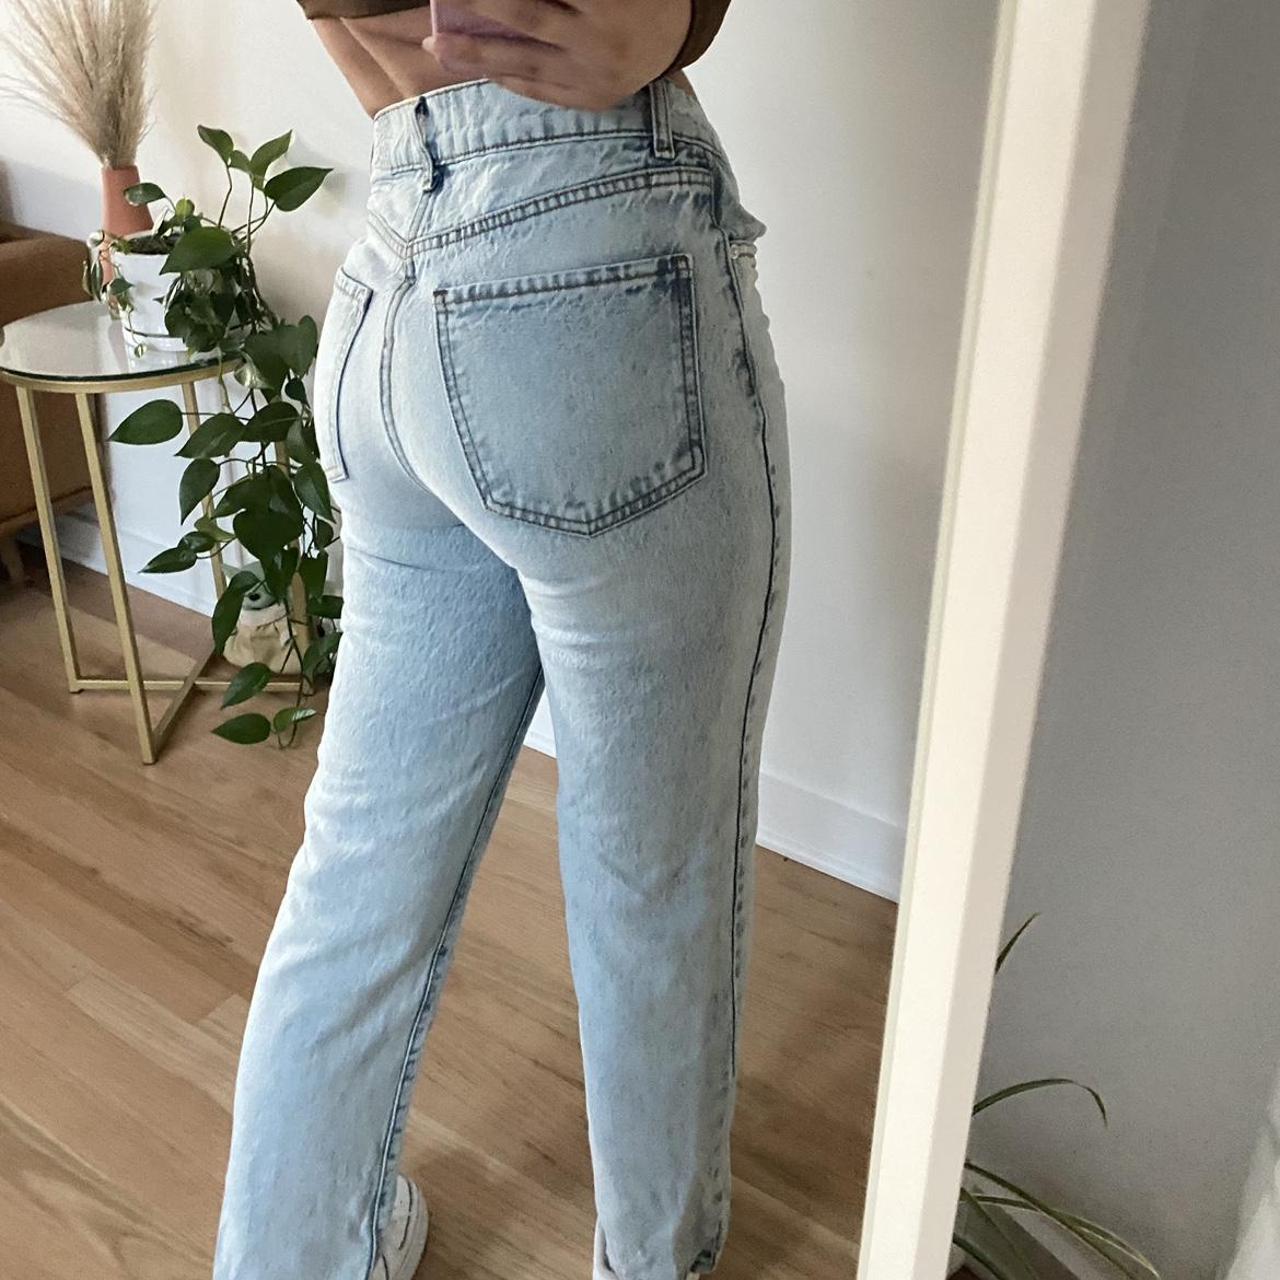 Revolution Women's Blue and White Jeans (3)